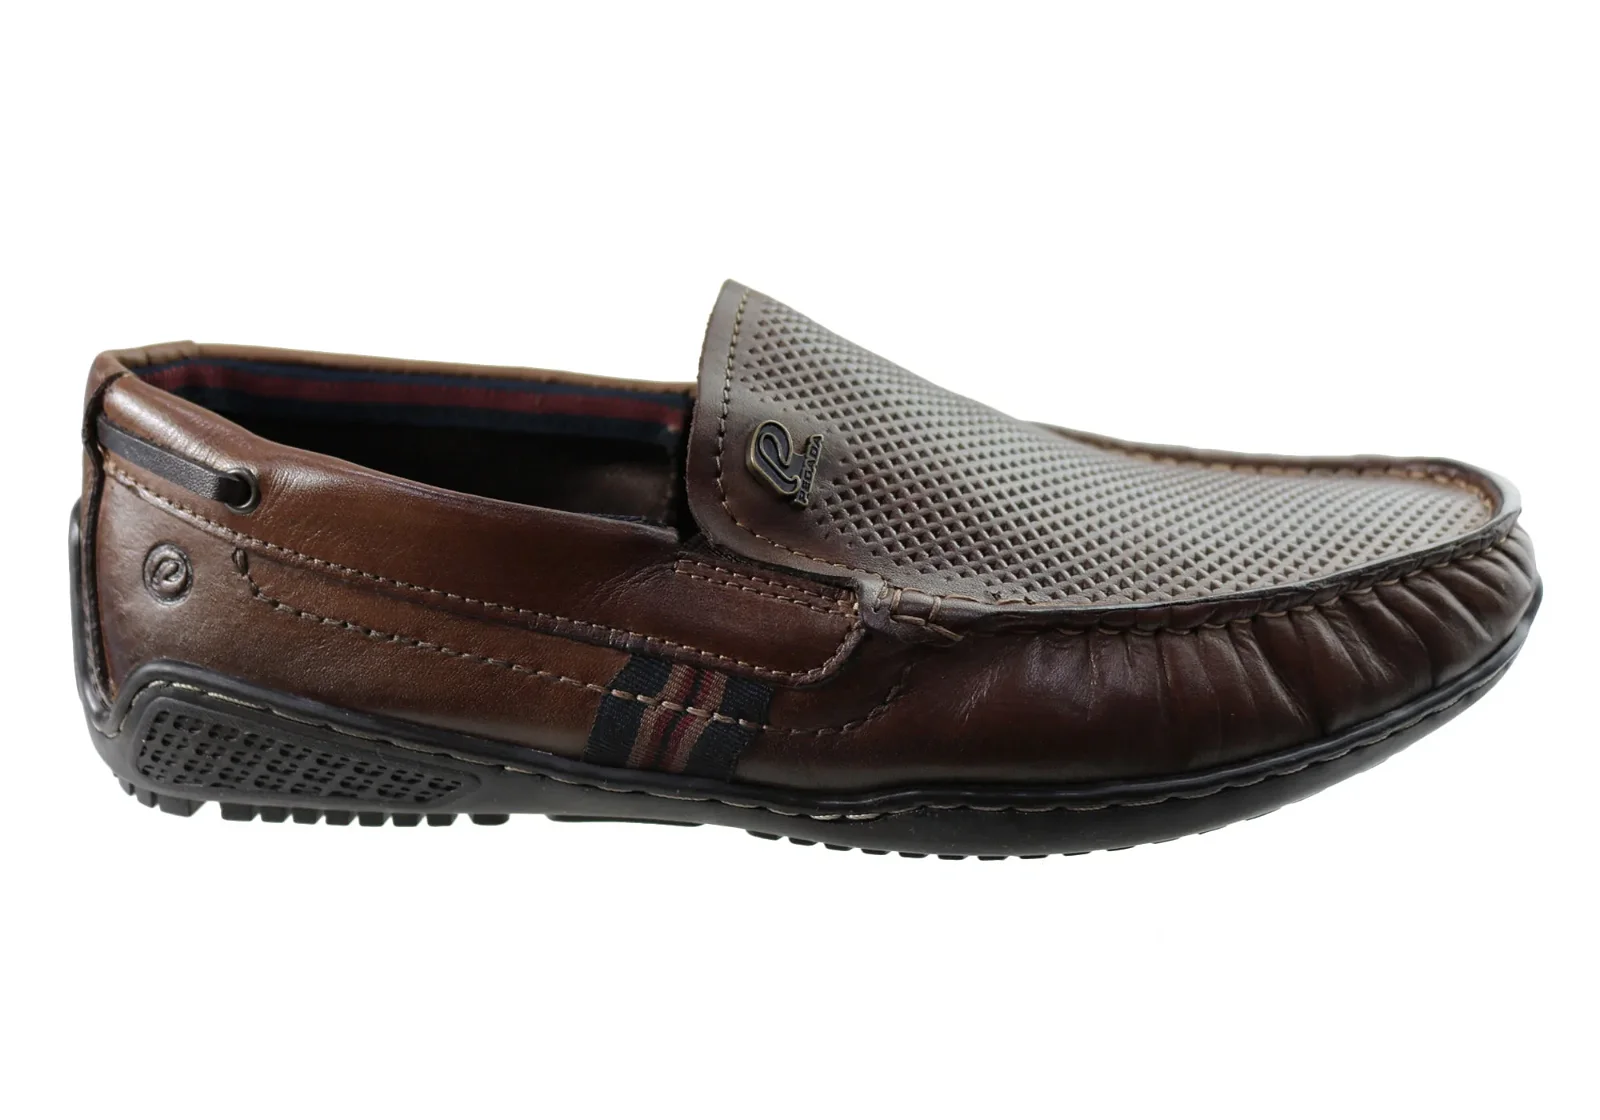 Image of Pegada Yossi Mens Comfortable Leather Loafers Shoes Made In Brazil